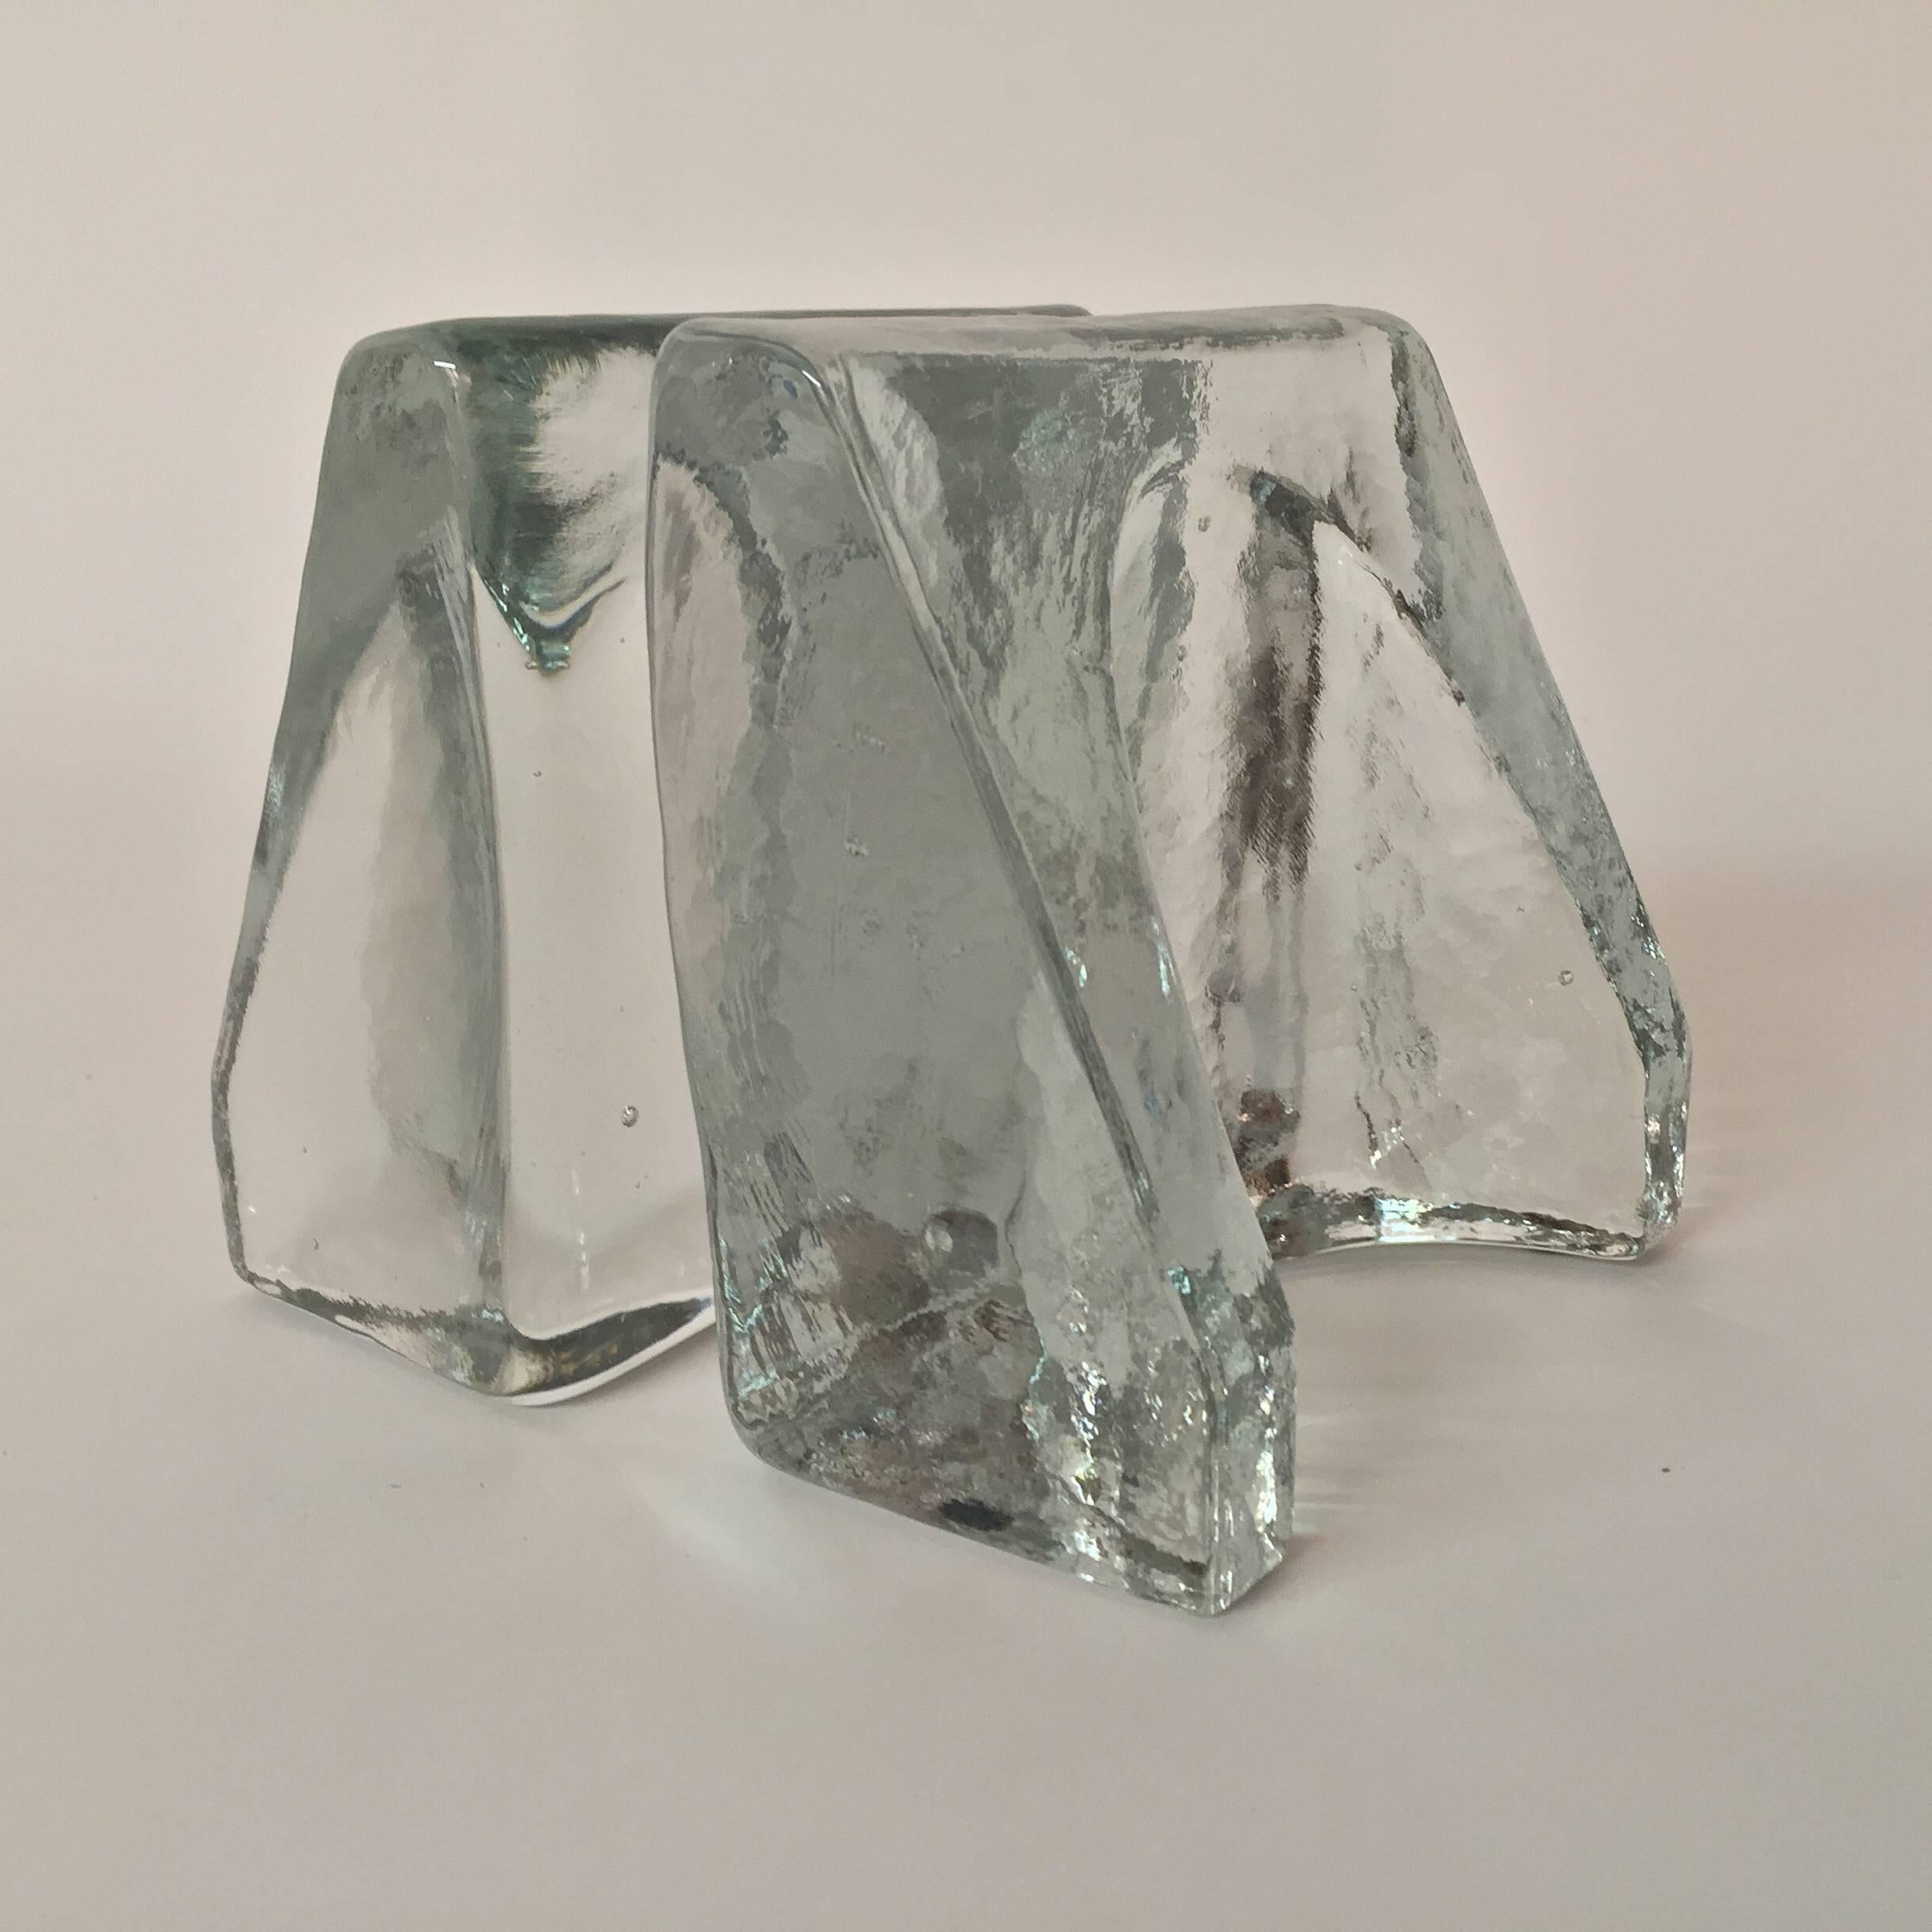 Fine pair of sculptural Blenko Handcraft wedge shaped clear glass bookends. Missing the silver foil label, but definitely Blenko. Excellent, original condition.